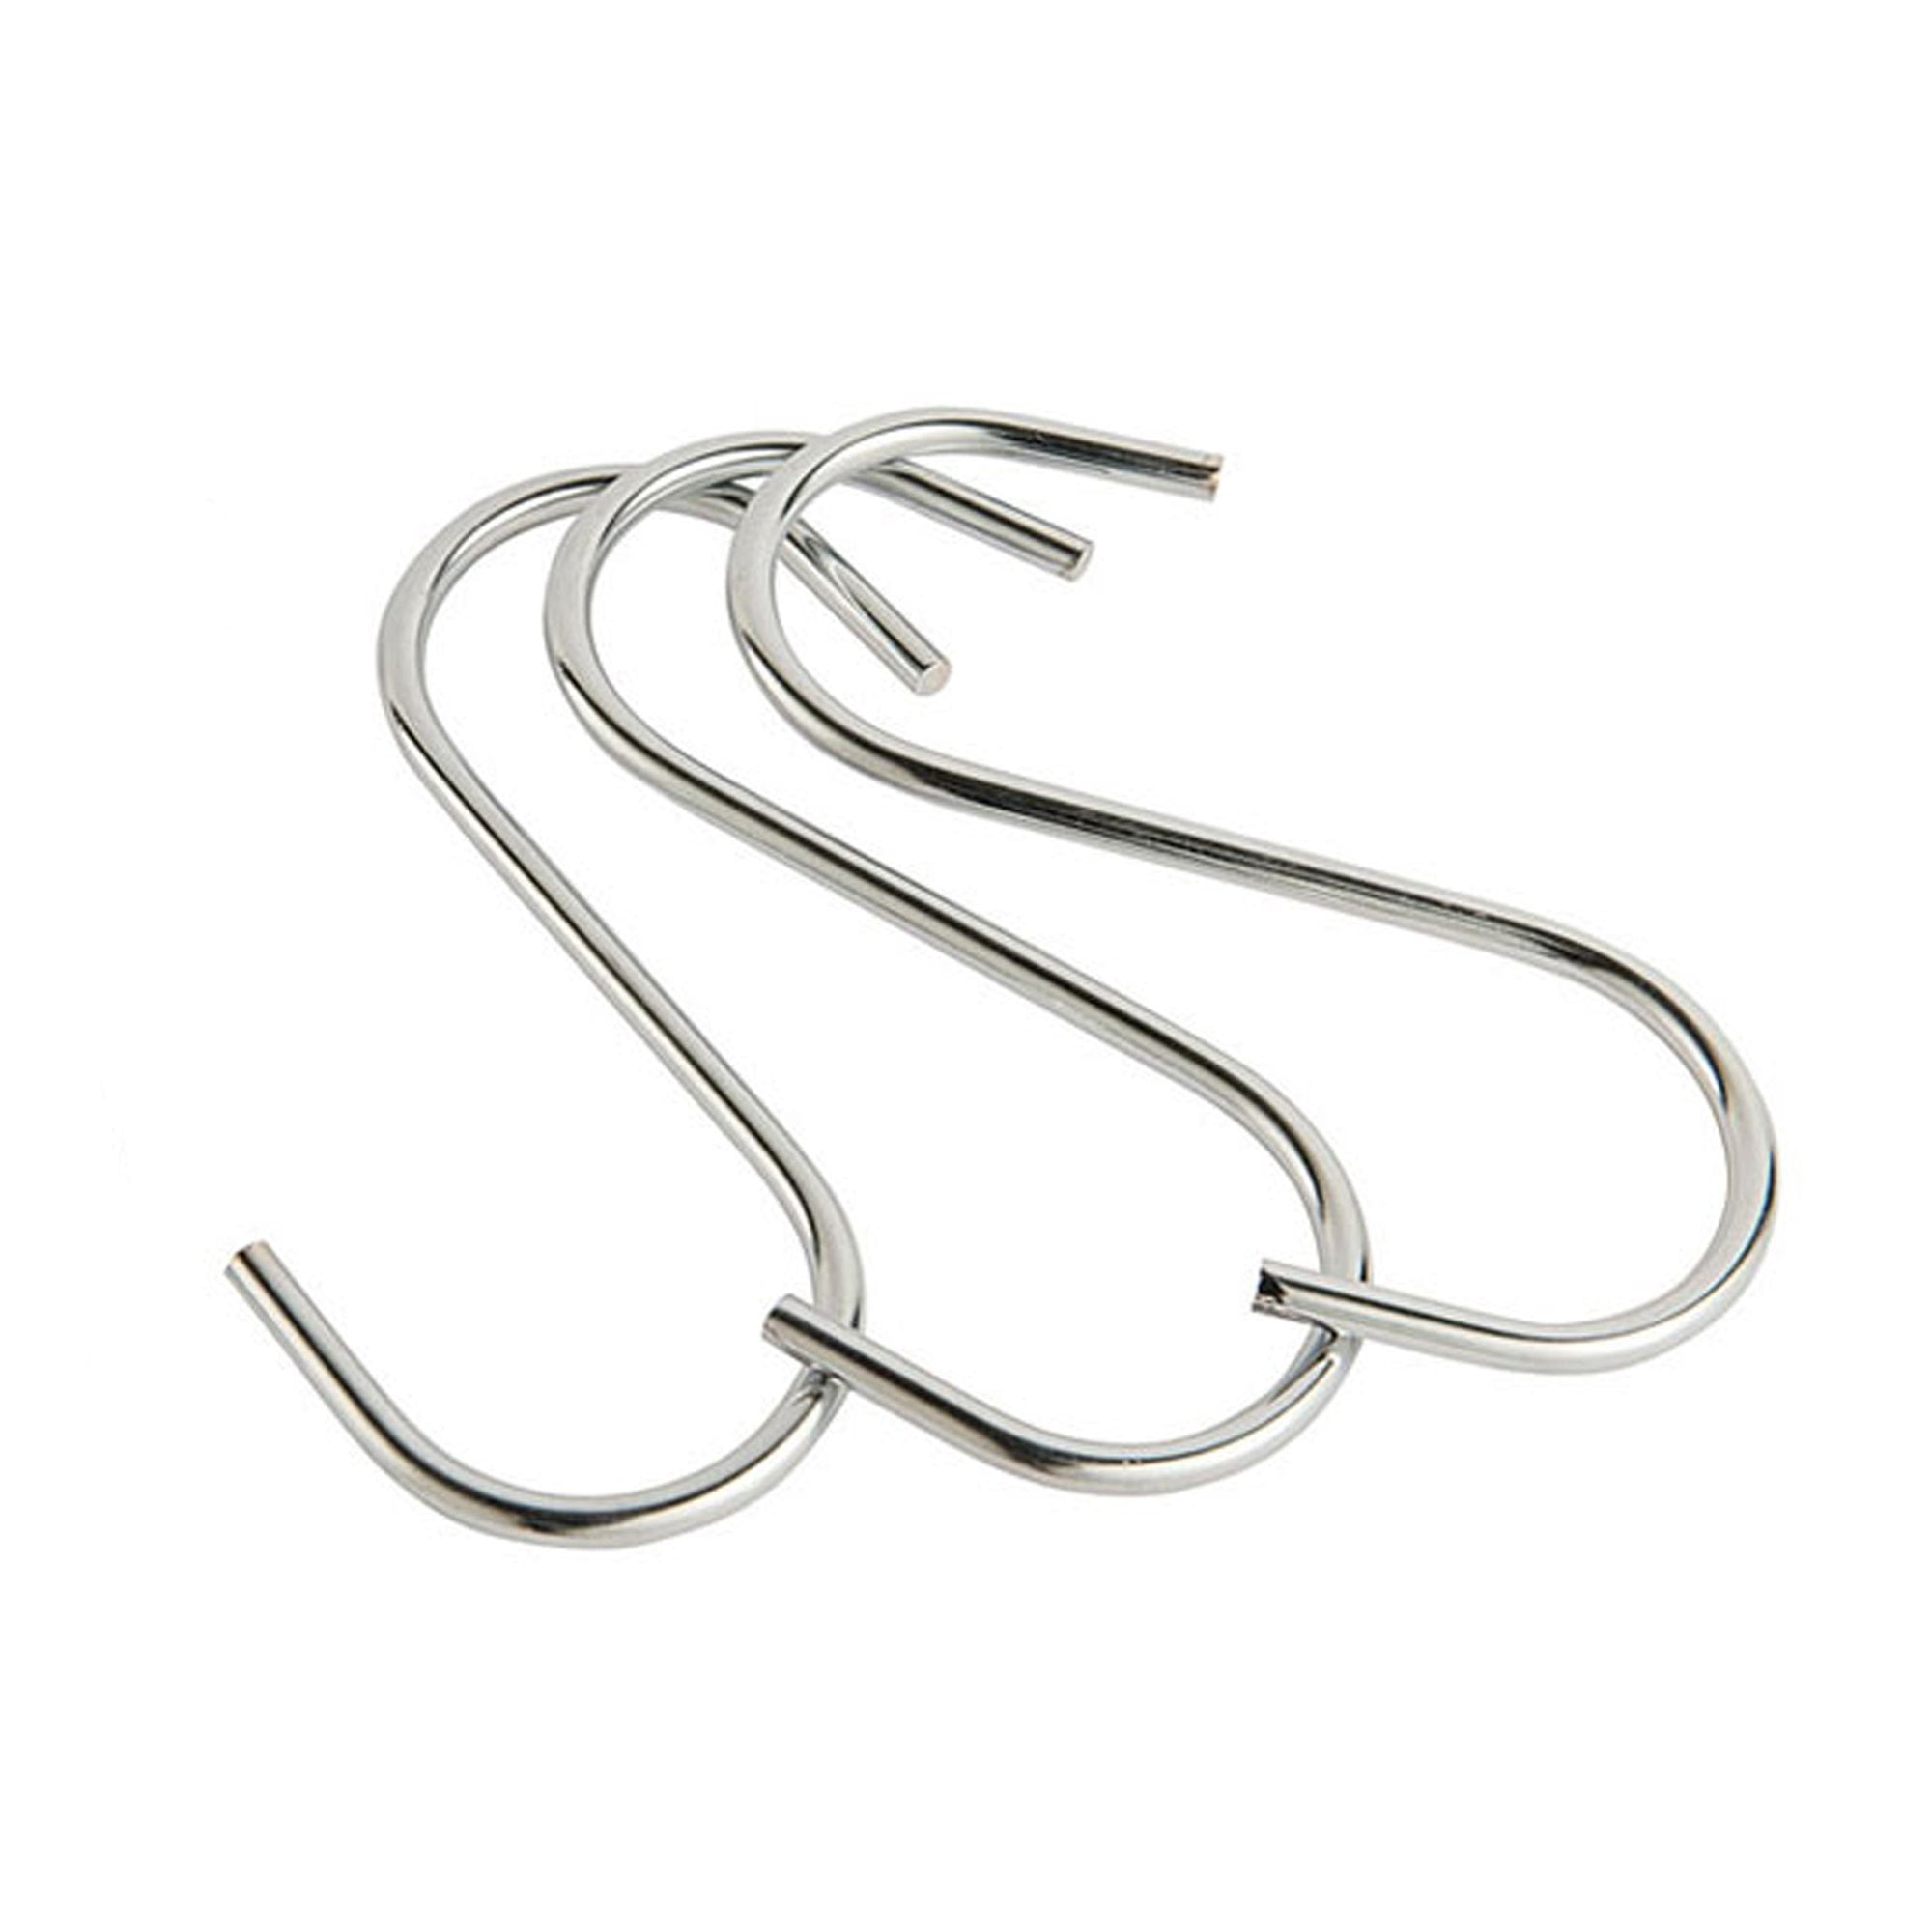 Wideskall 5 inch Zine Plated Metal Steel S Hooks for Hanging Pack